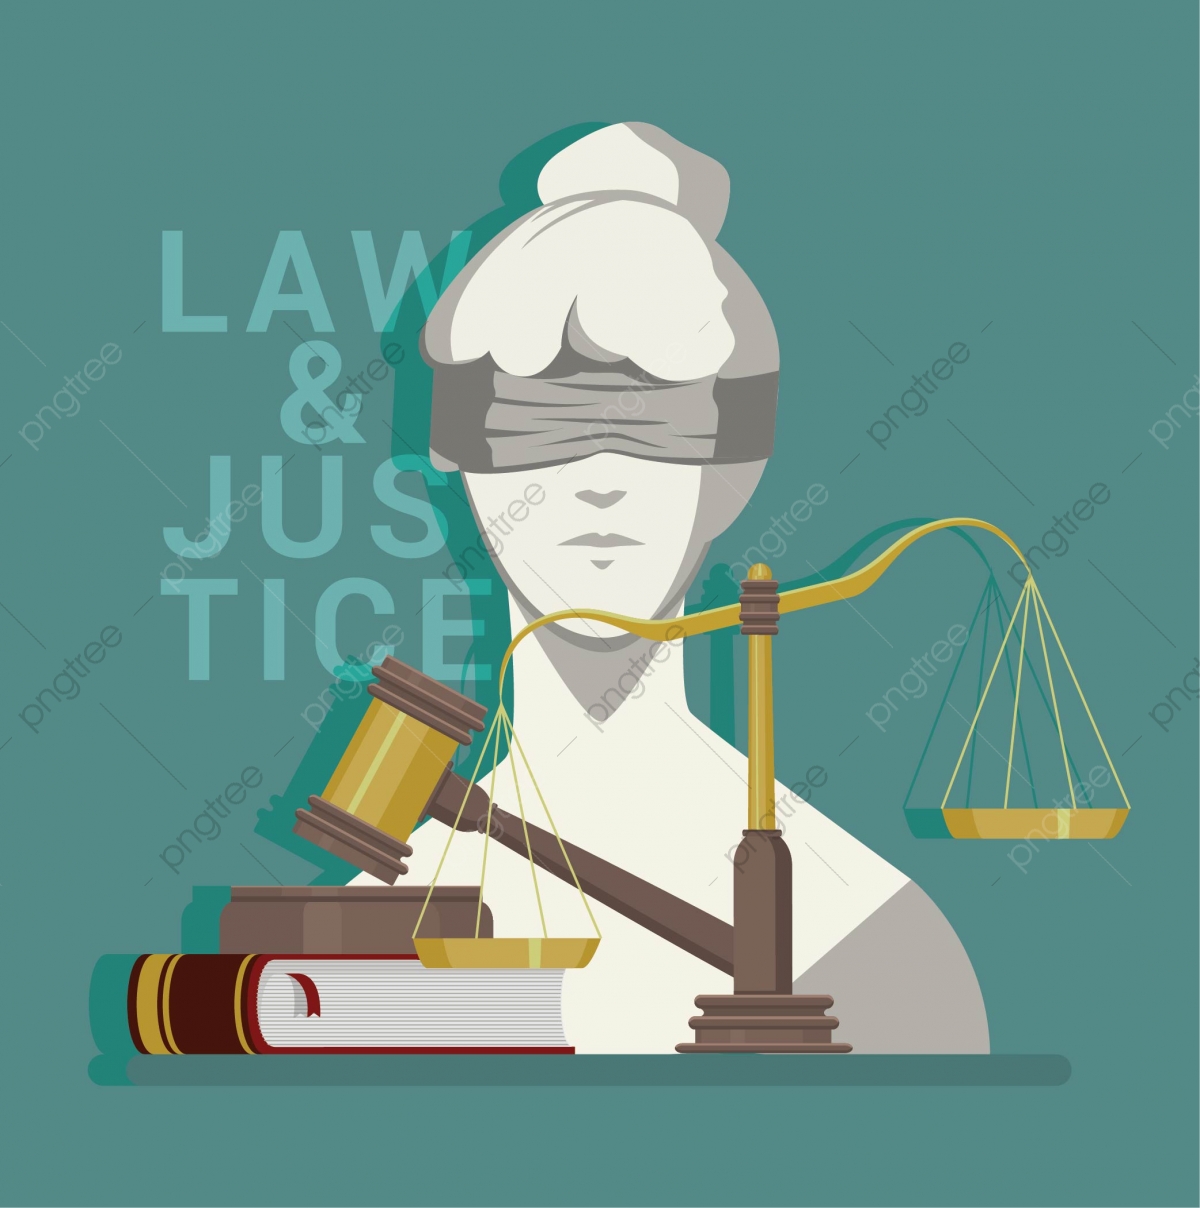 law-and-justice-illustration-png-image_3718775.jpg